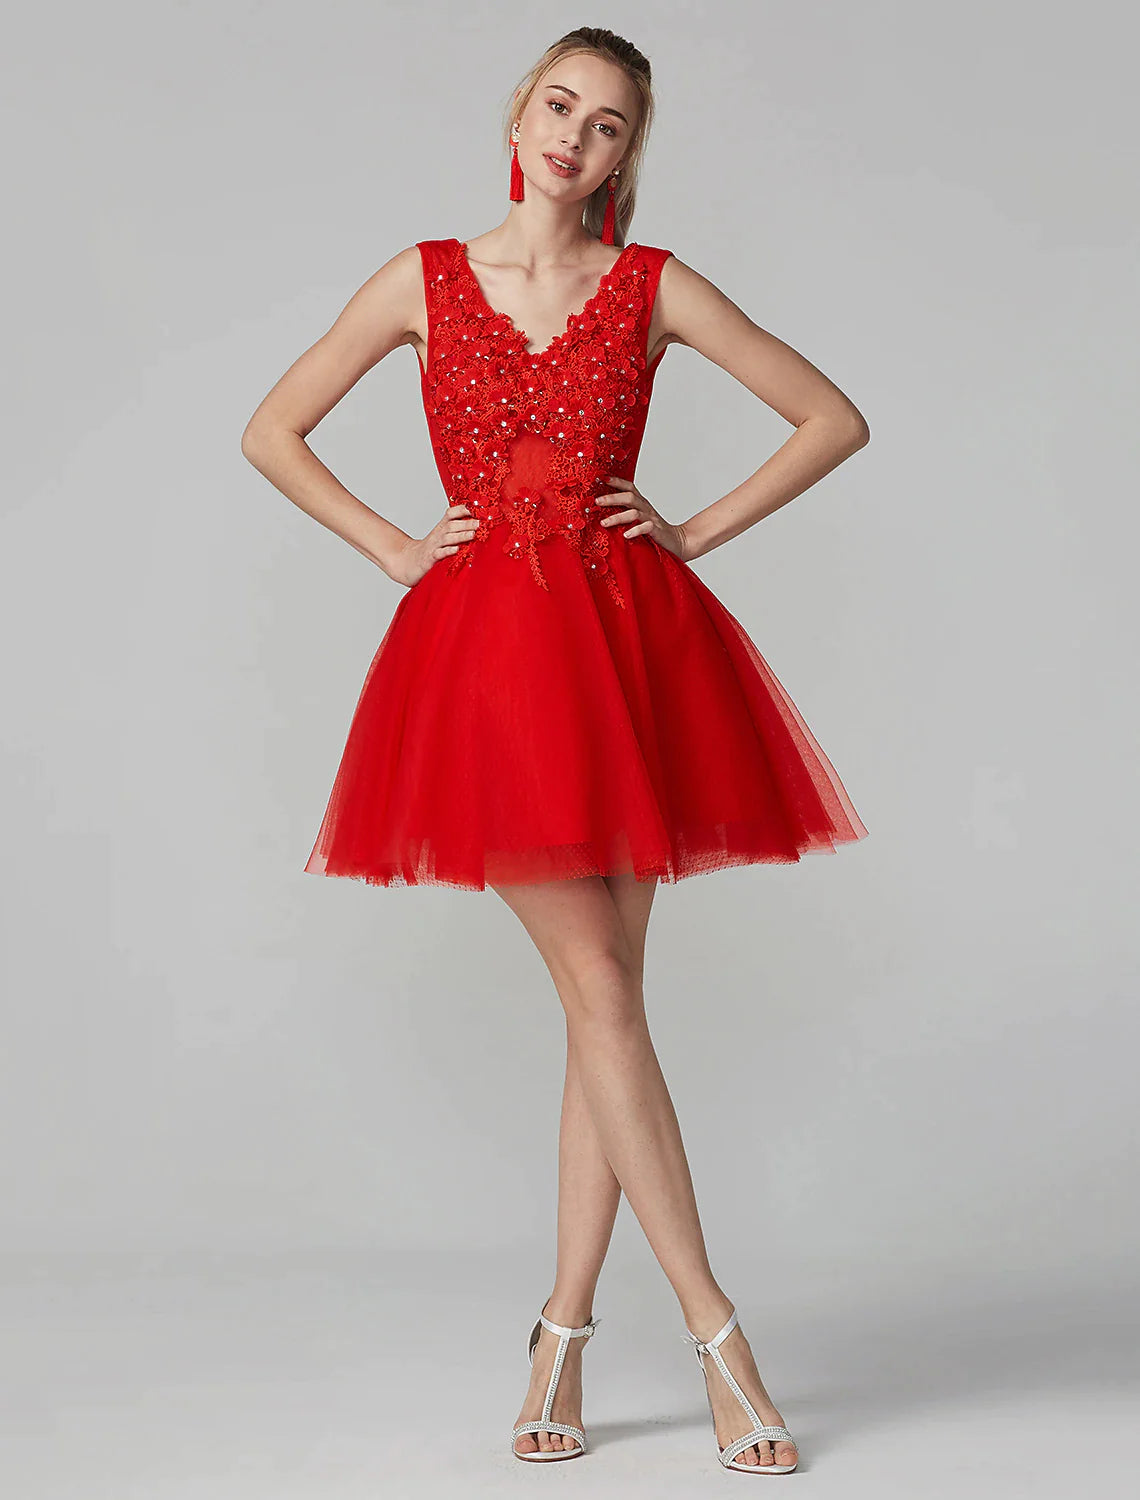 A-Line Party Dress Homecoming Graduation Short / Mini Sleeveless V Neck Lace Over Tulle with Crystals Appliques